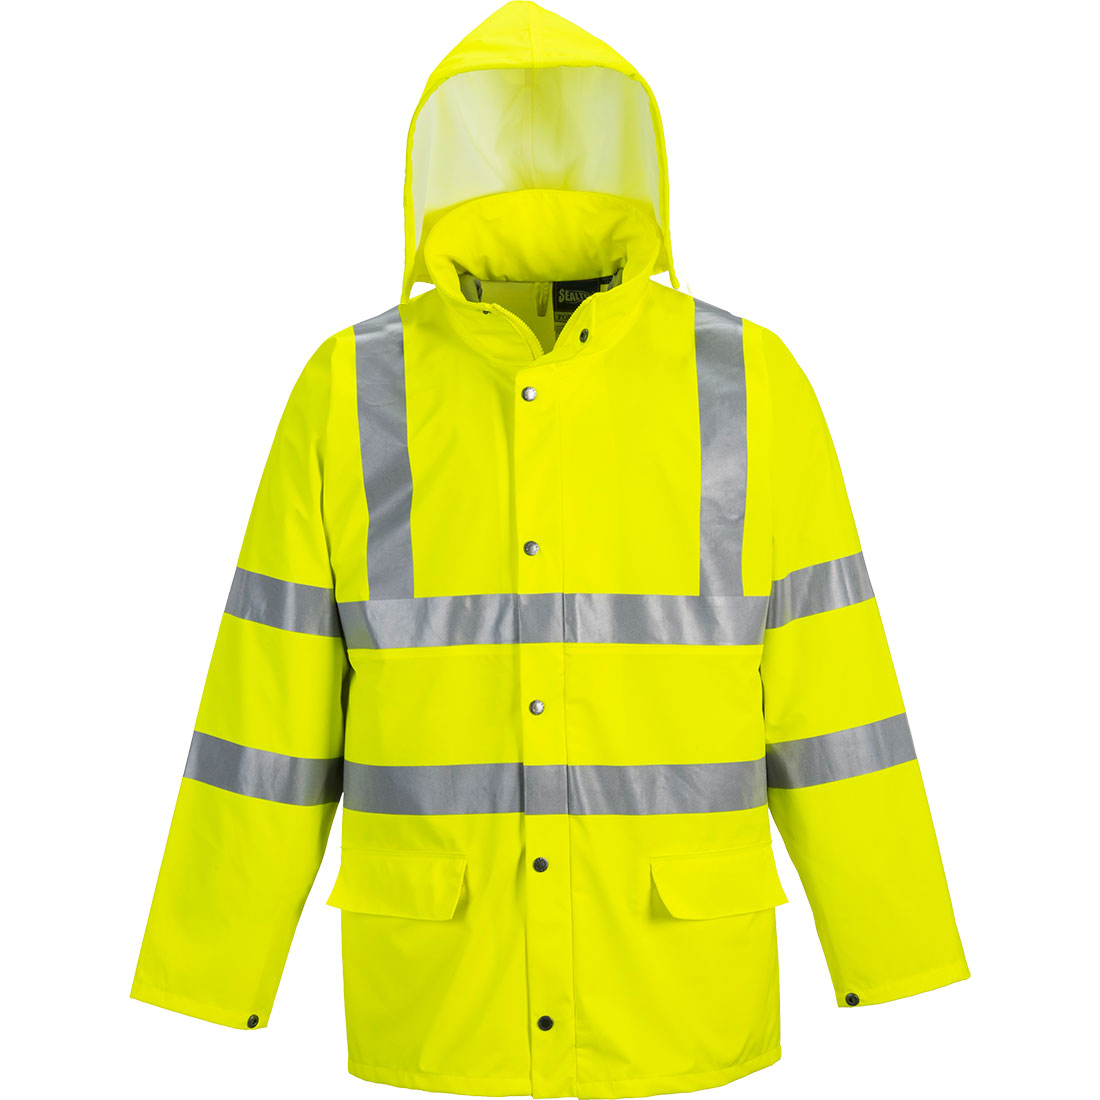 Sealtex Ultra Jacket, Yellow     Size Small R/Fit